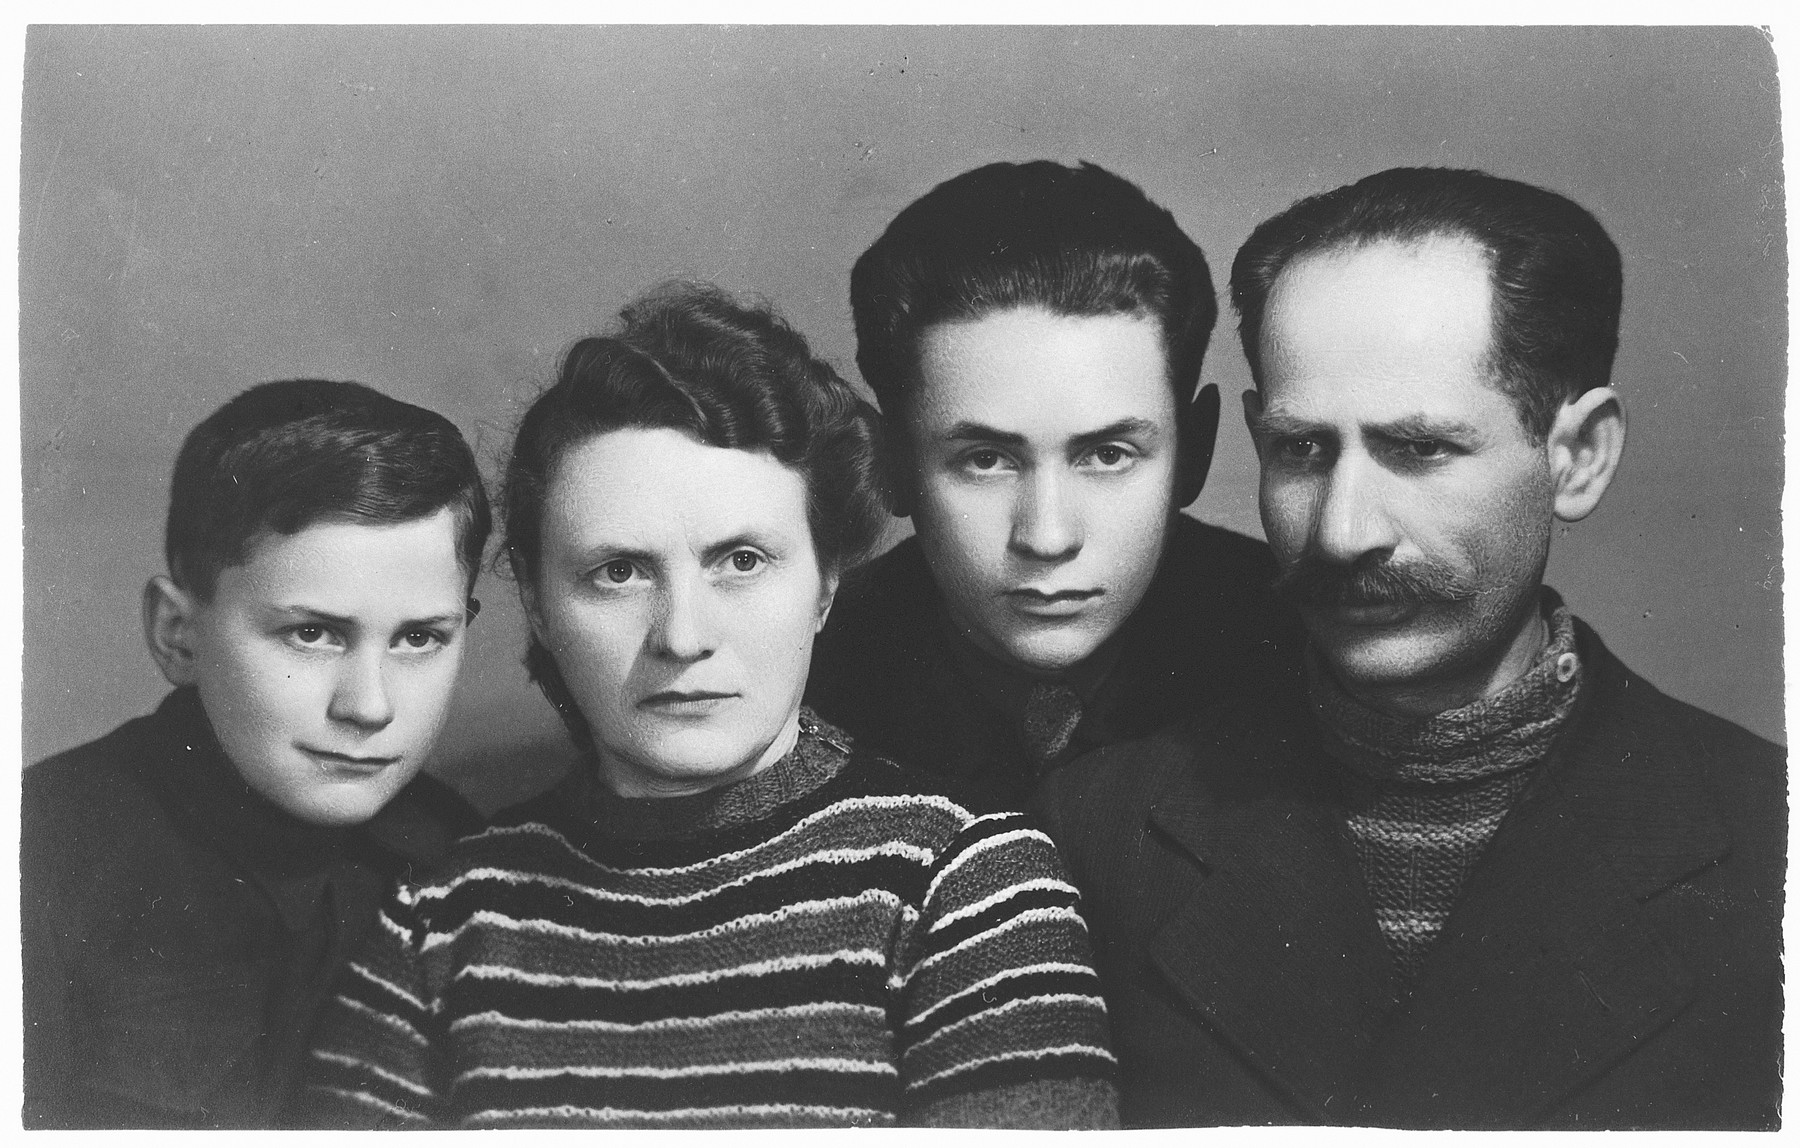 Studio portrait of a family of Polish Jewish survivors in Krakow, Poland.

Pictured are Isaac and Ida Friedberg and their two children, Maurice (second from the right) and Shimon (left).